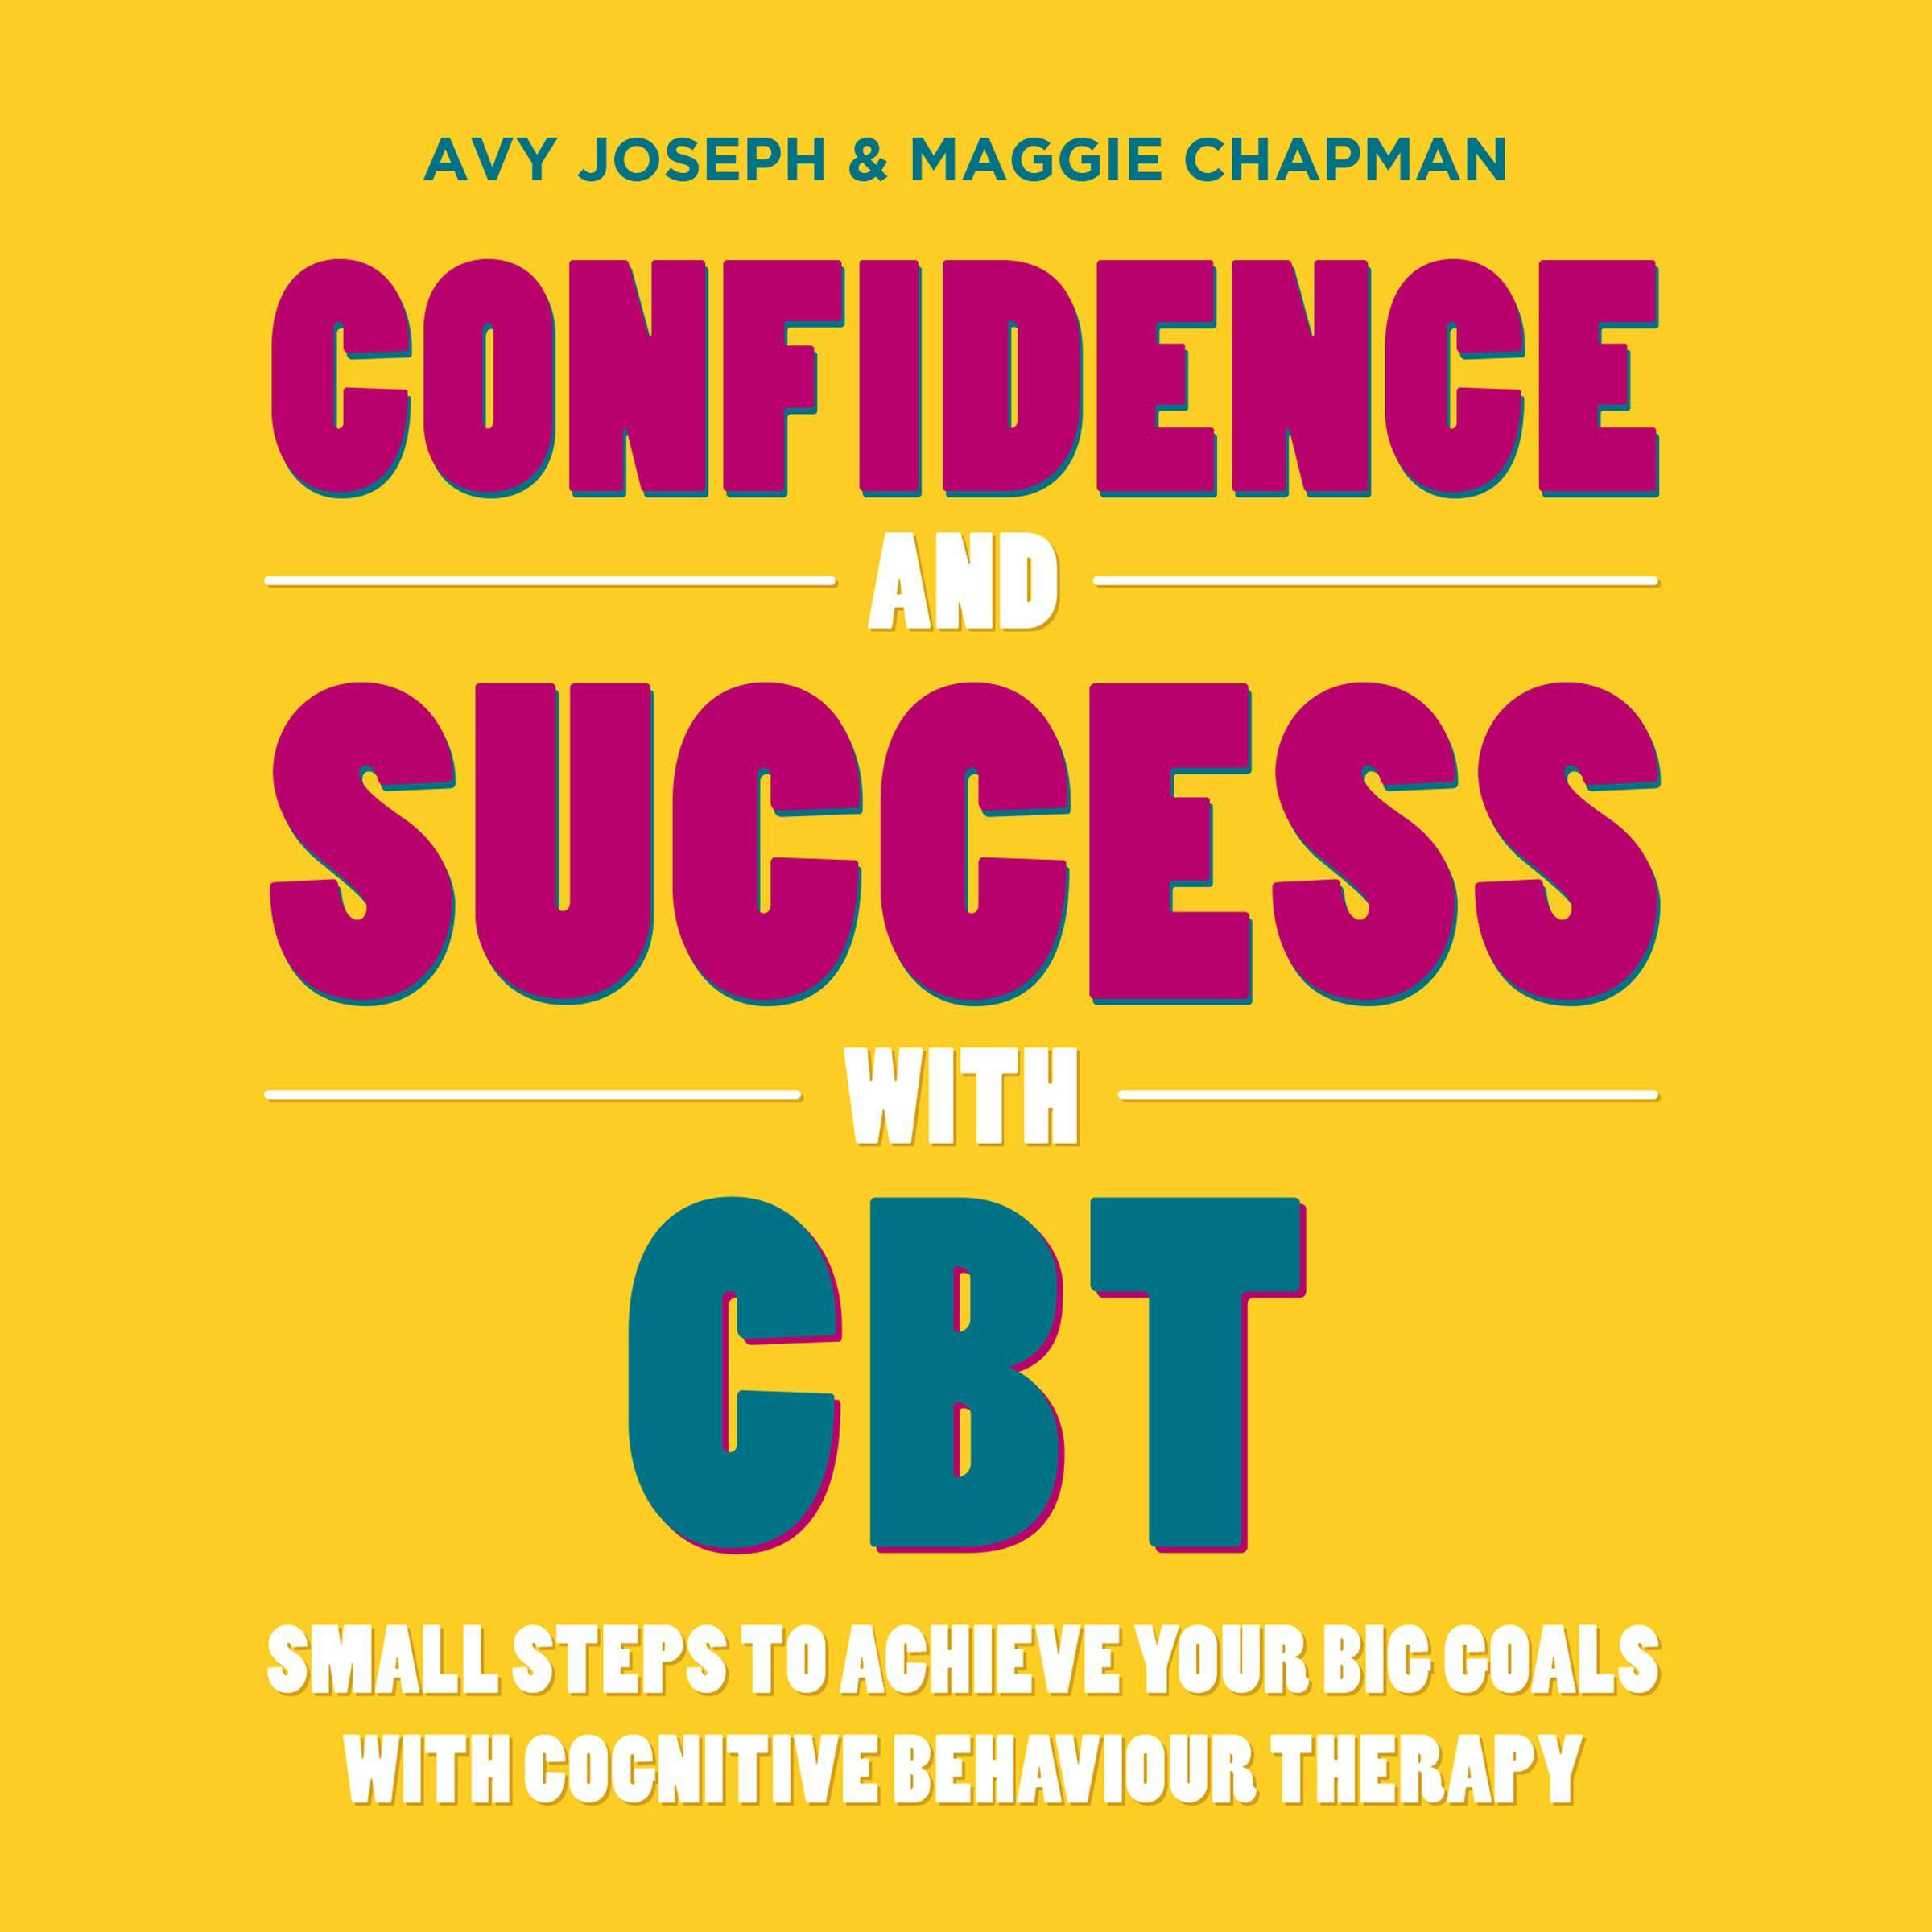 Confidence and Success with CBT: Small Steps to Achieve Your Big Goals with Cognitive Behaviour Therapy - Maggie Chapman, Avy Joseph